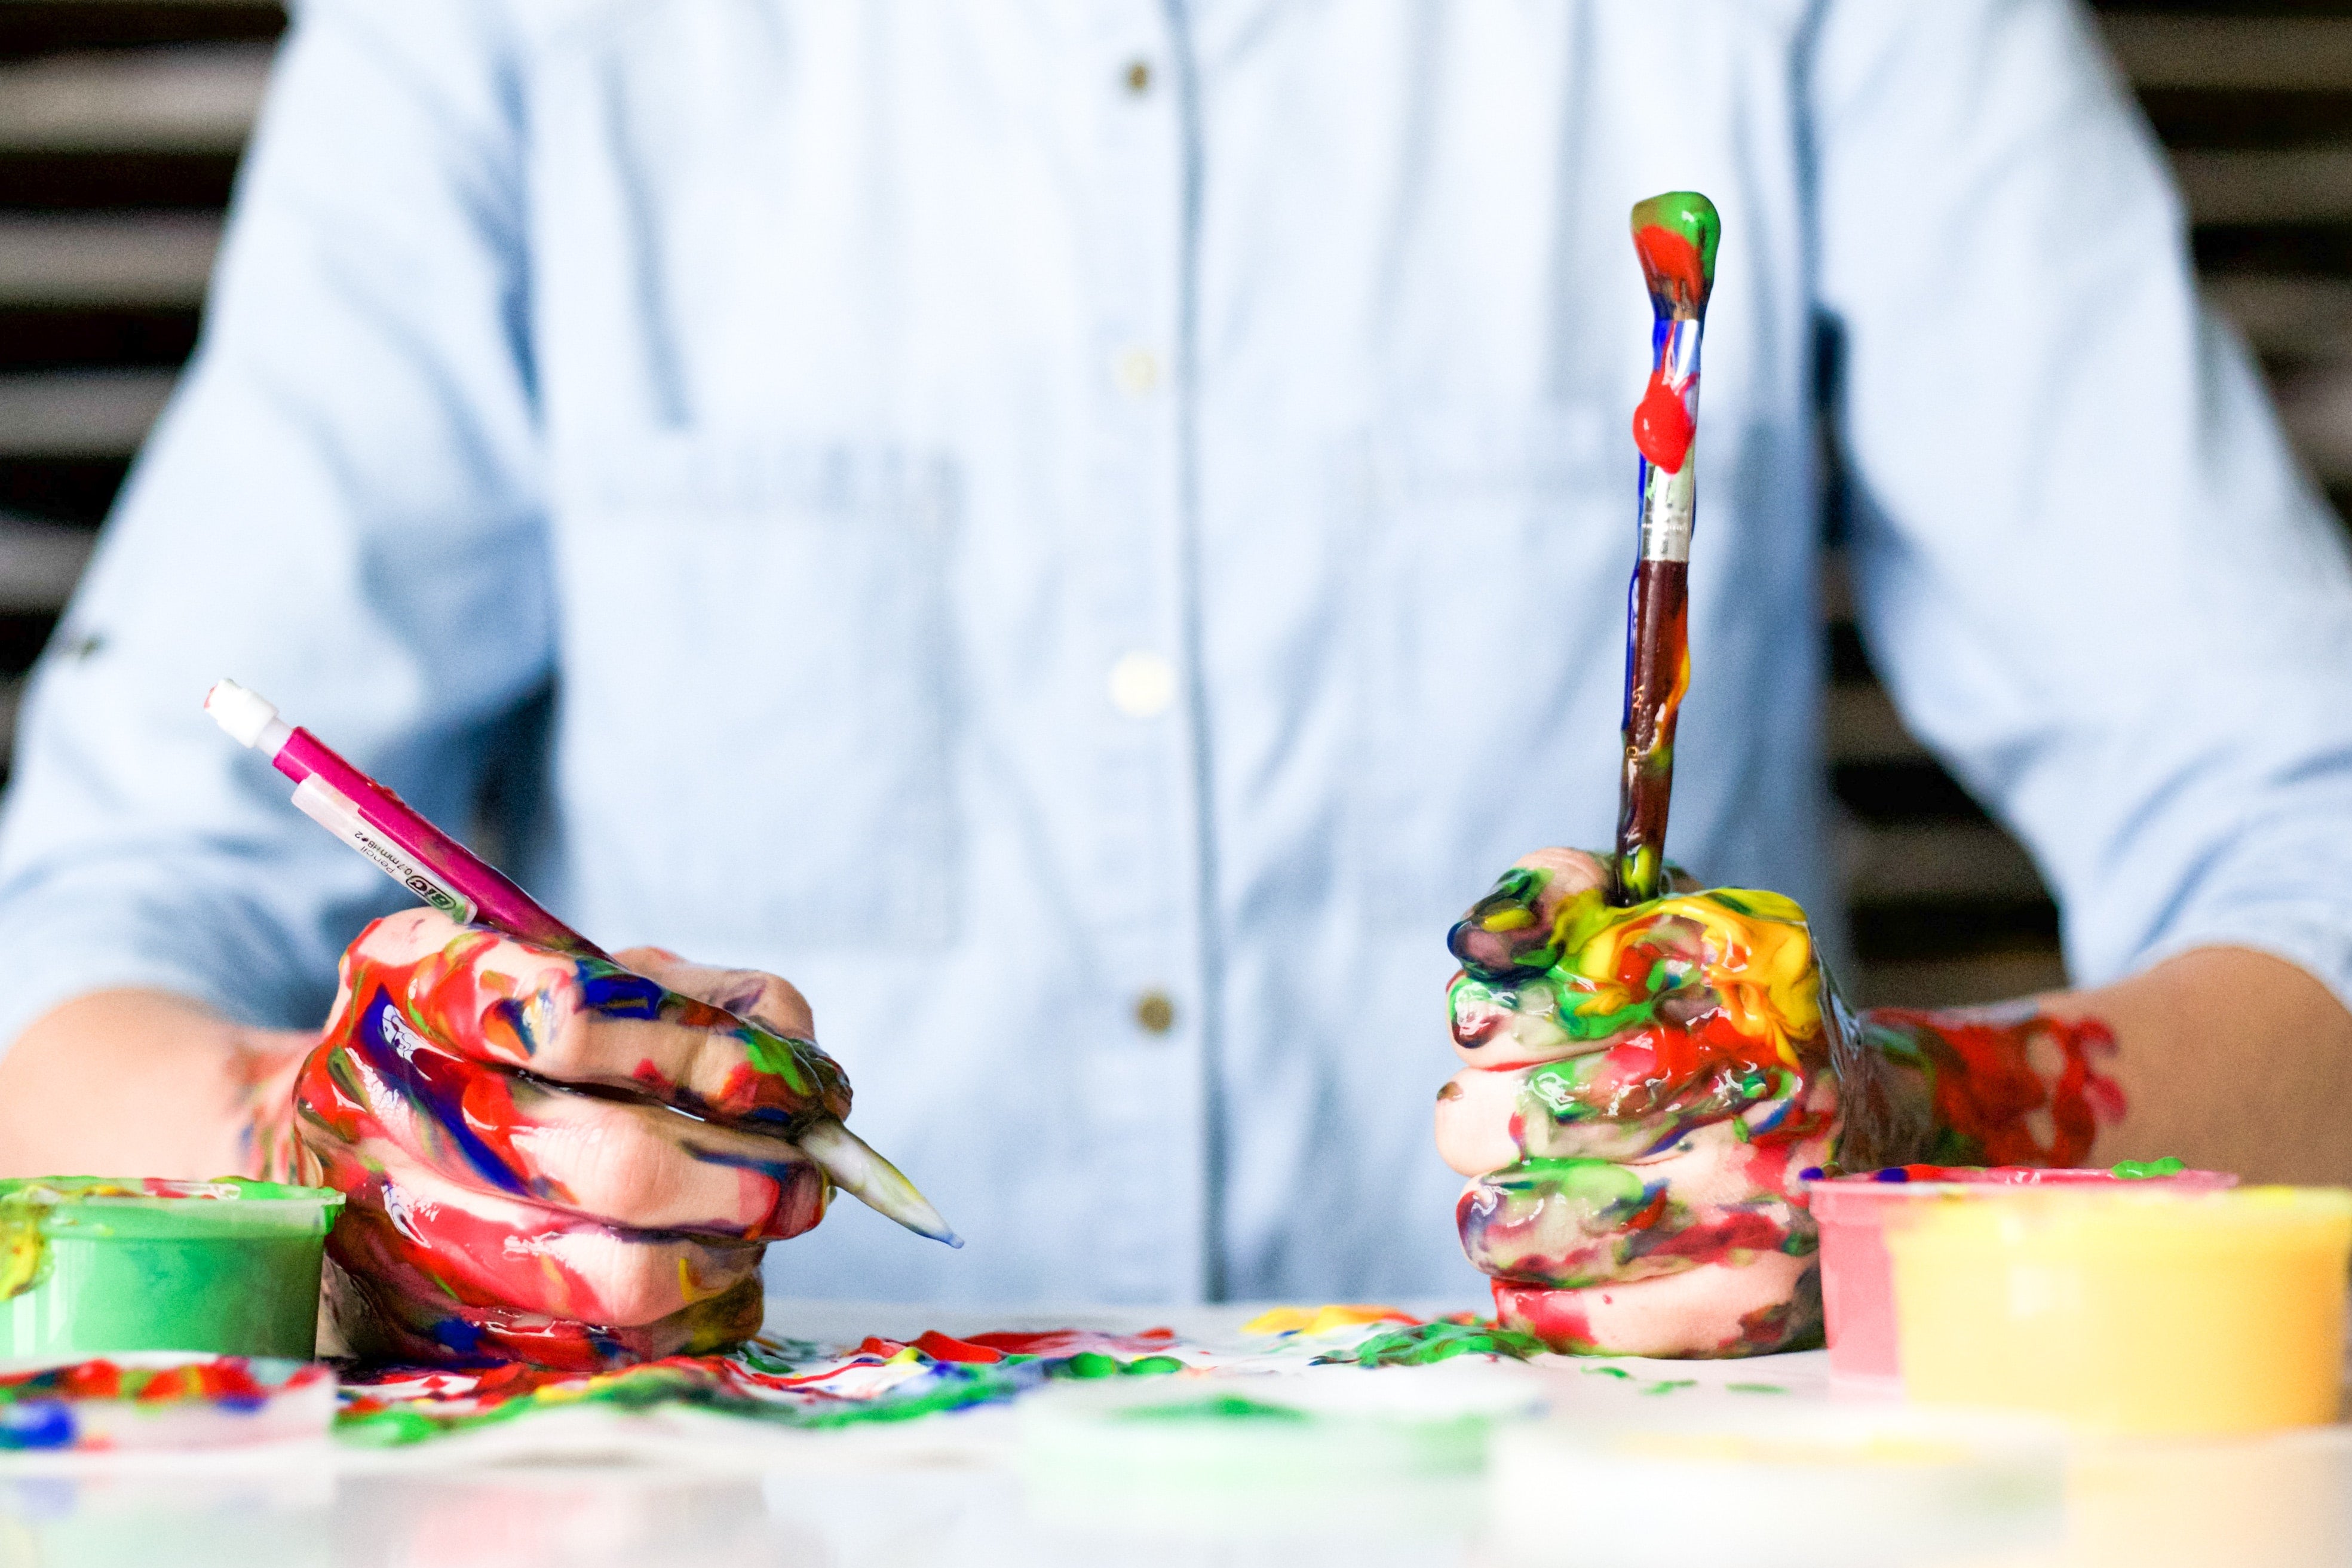 Man in blue shirt holding paintbrushes in both hands with paint everywhere 